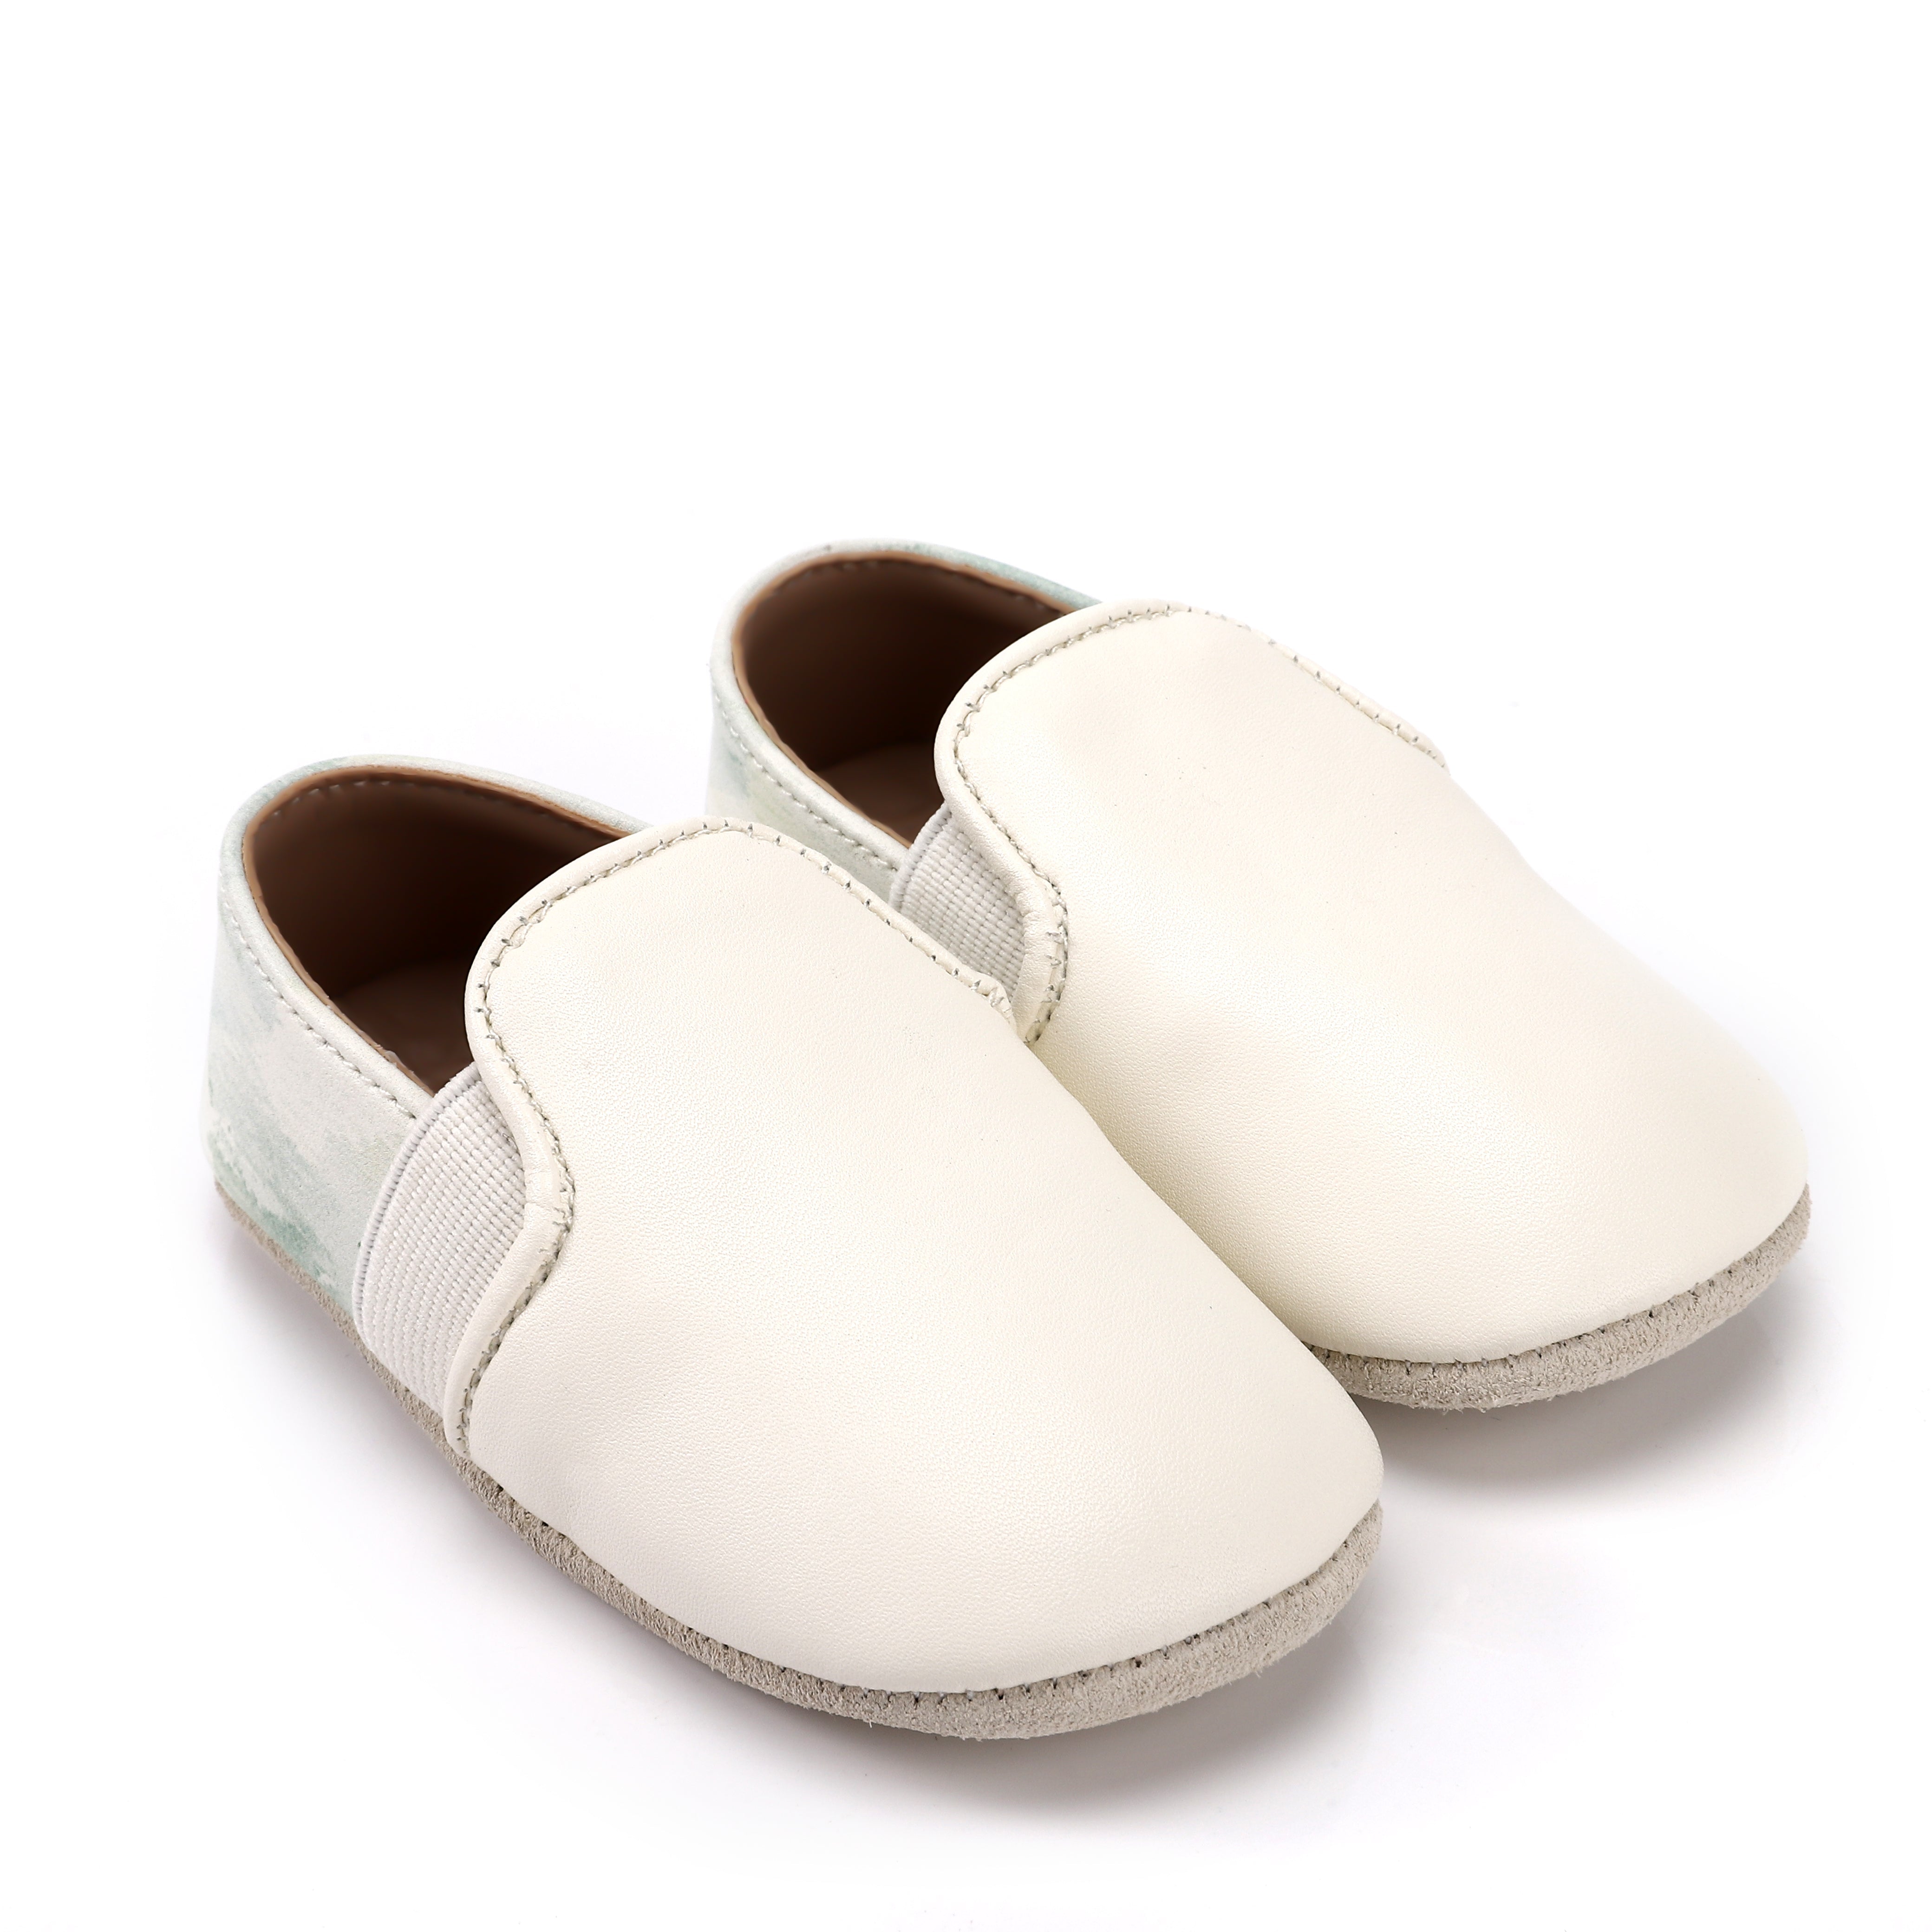 Leather Tip Loafer - Soft Sole